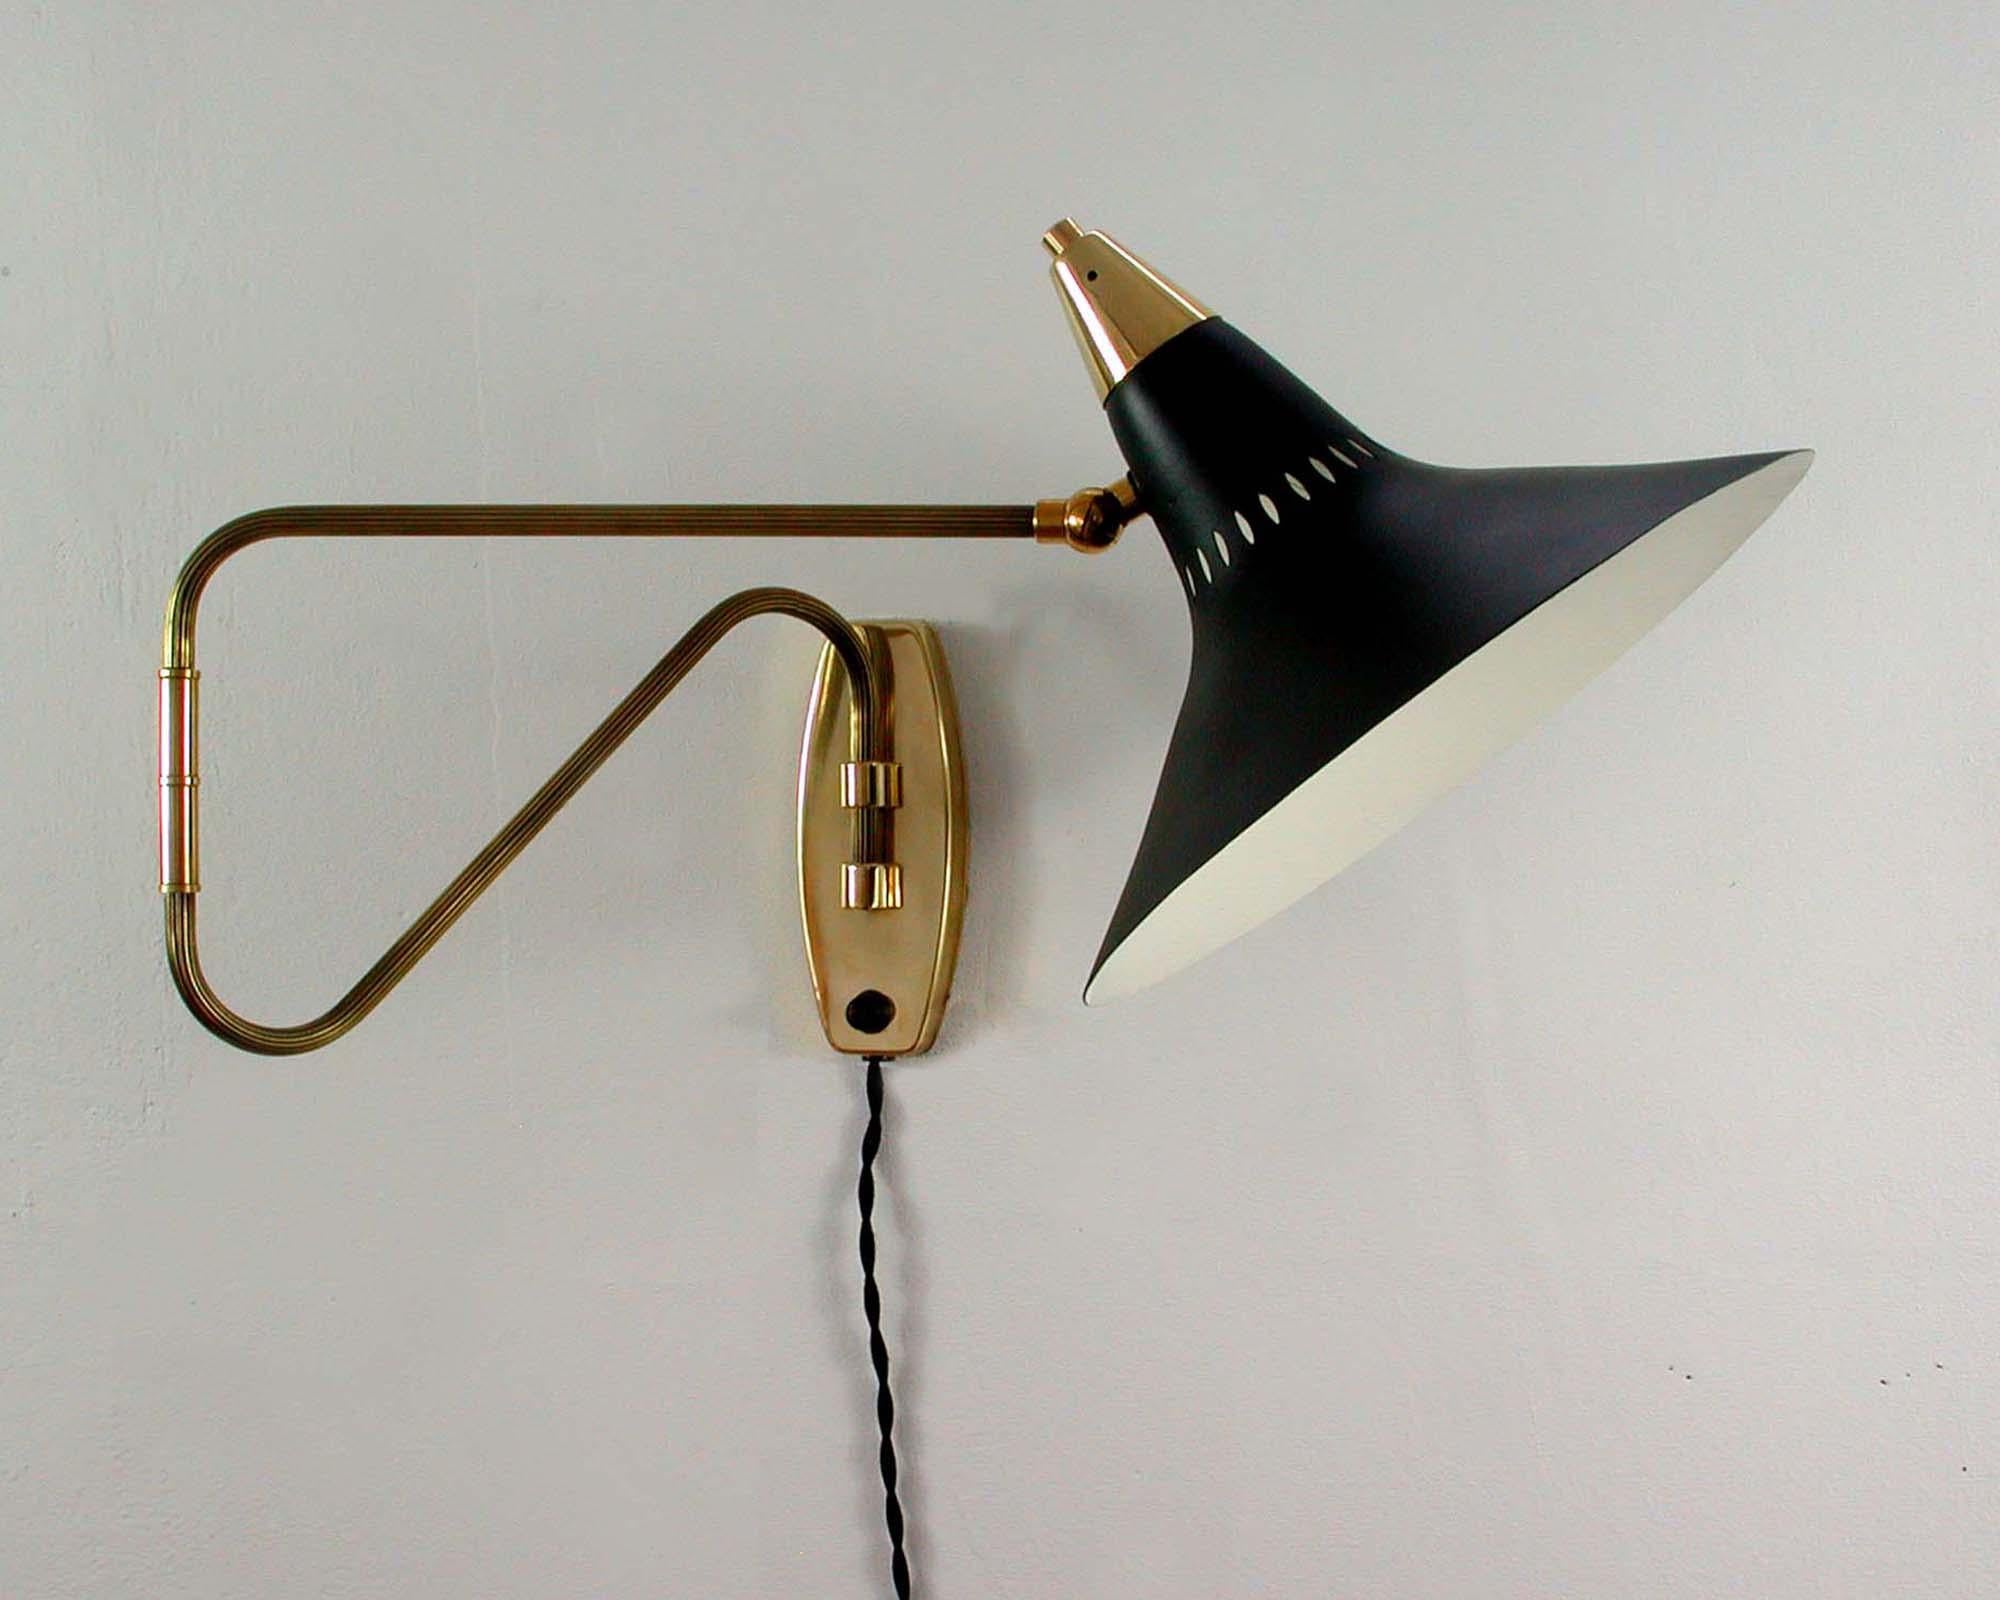 This 1950s articulating wall lamp was designed and manufactured in Sweden.

The wall light has got a black witch hat shaped lampshade and brass swiveling lamp arm with brass details and a brass wall fixture. The lamp has been rewired and we have